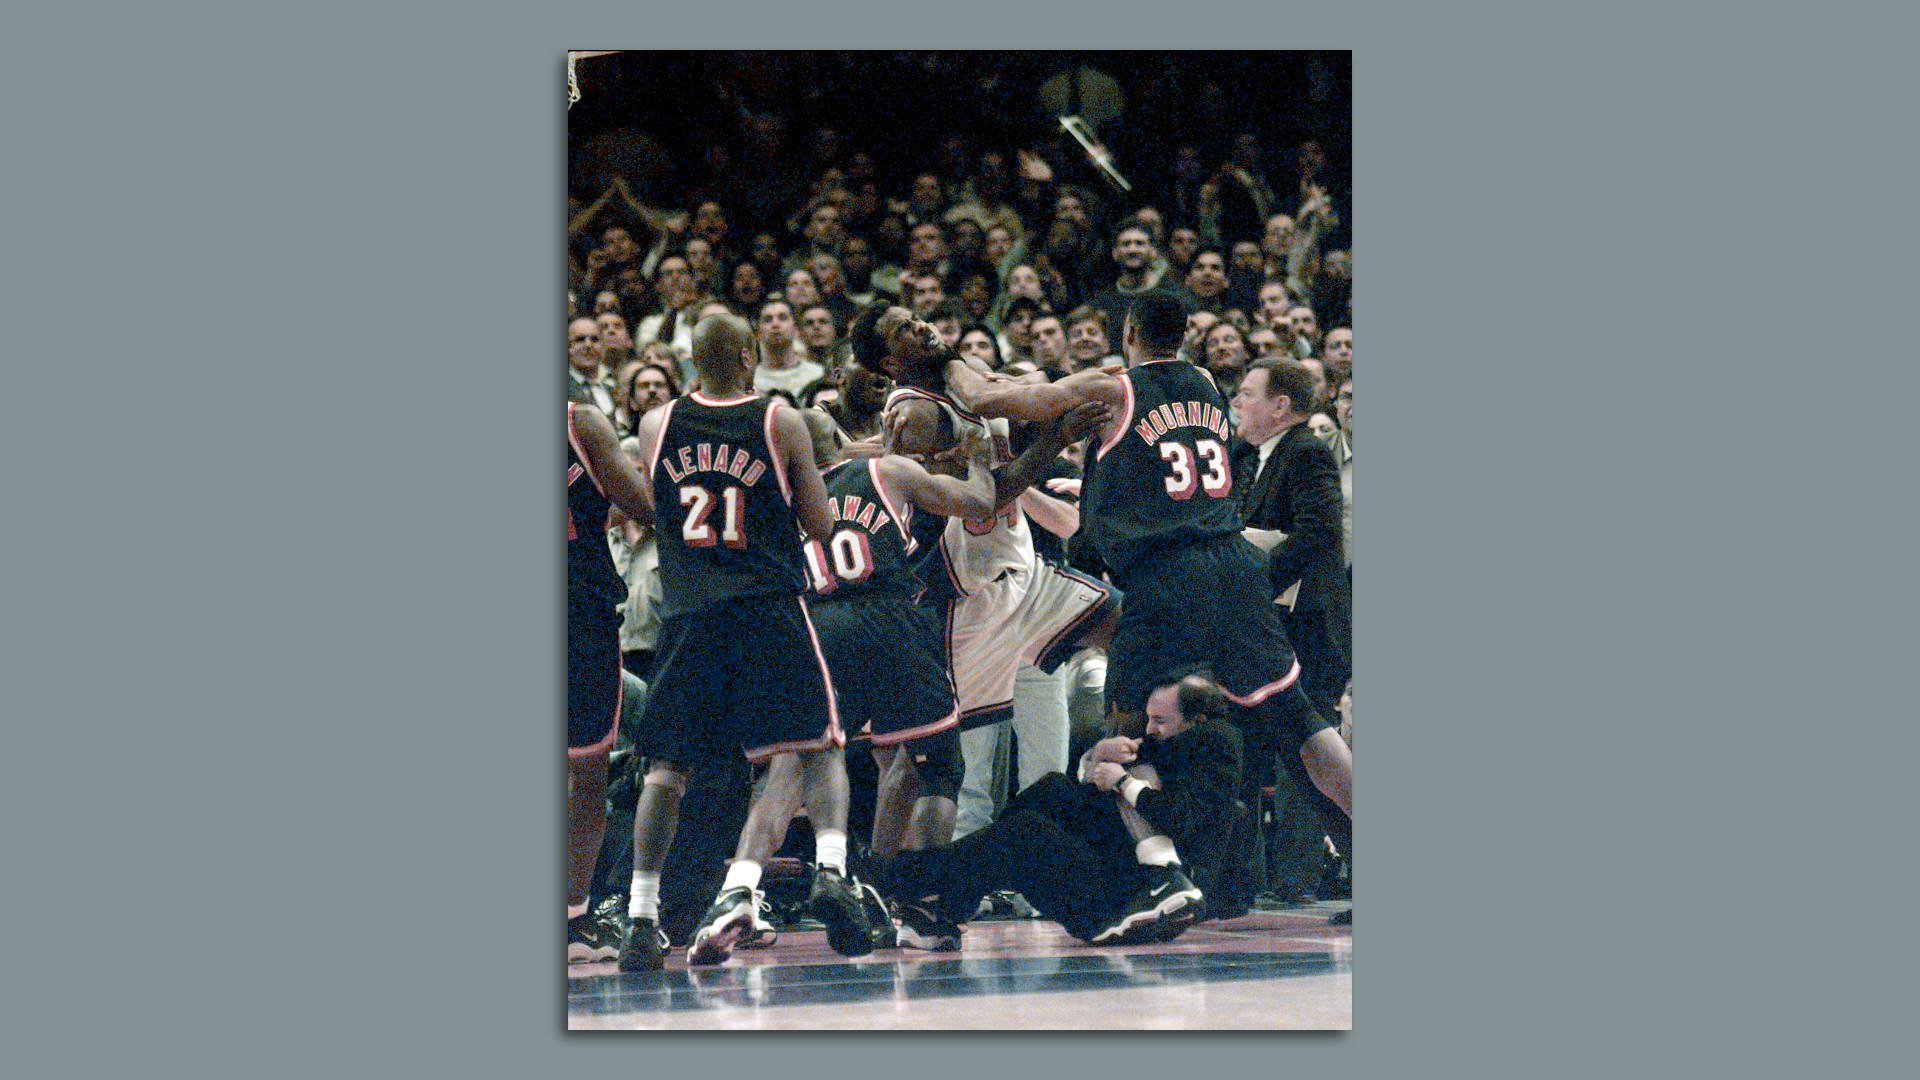 UNITED STATES - APRIL 30: New York Knicks vs. Miami Heat at MSG for Game4... Knicks Charles Oakley is shoved by Heats Alonzo Mourning while Jeff Van Gundy got a piece of Alonzo's leg trying to seperate players. 